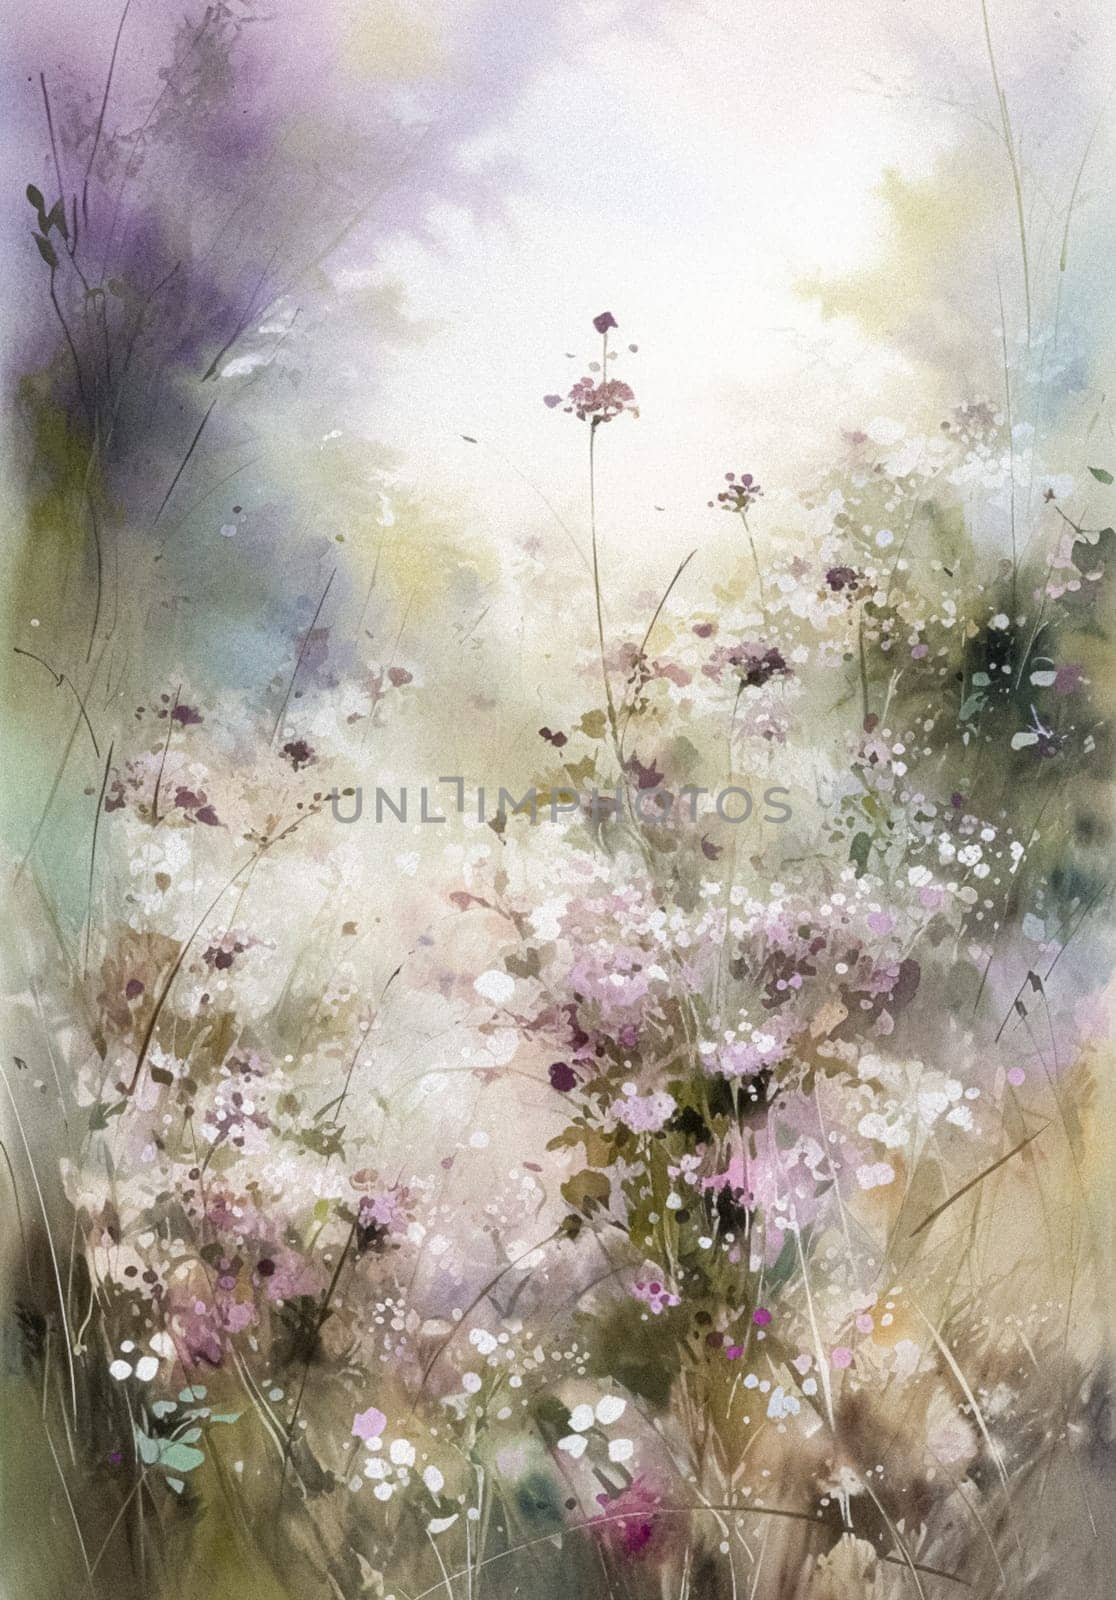 Oil fine art, romantic flowers in soft pastel colours, evoking a sense of tranquility and natural floral beauty, printable art design by Anneleven